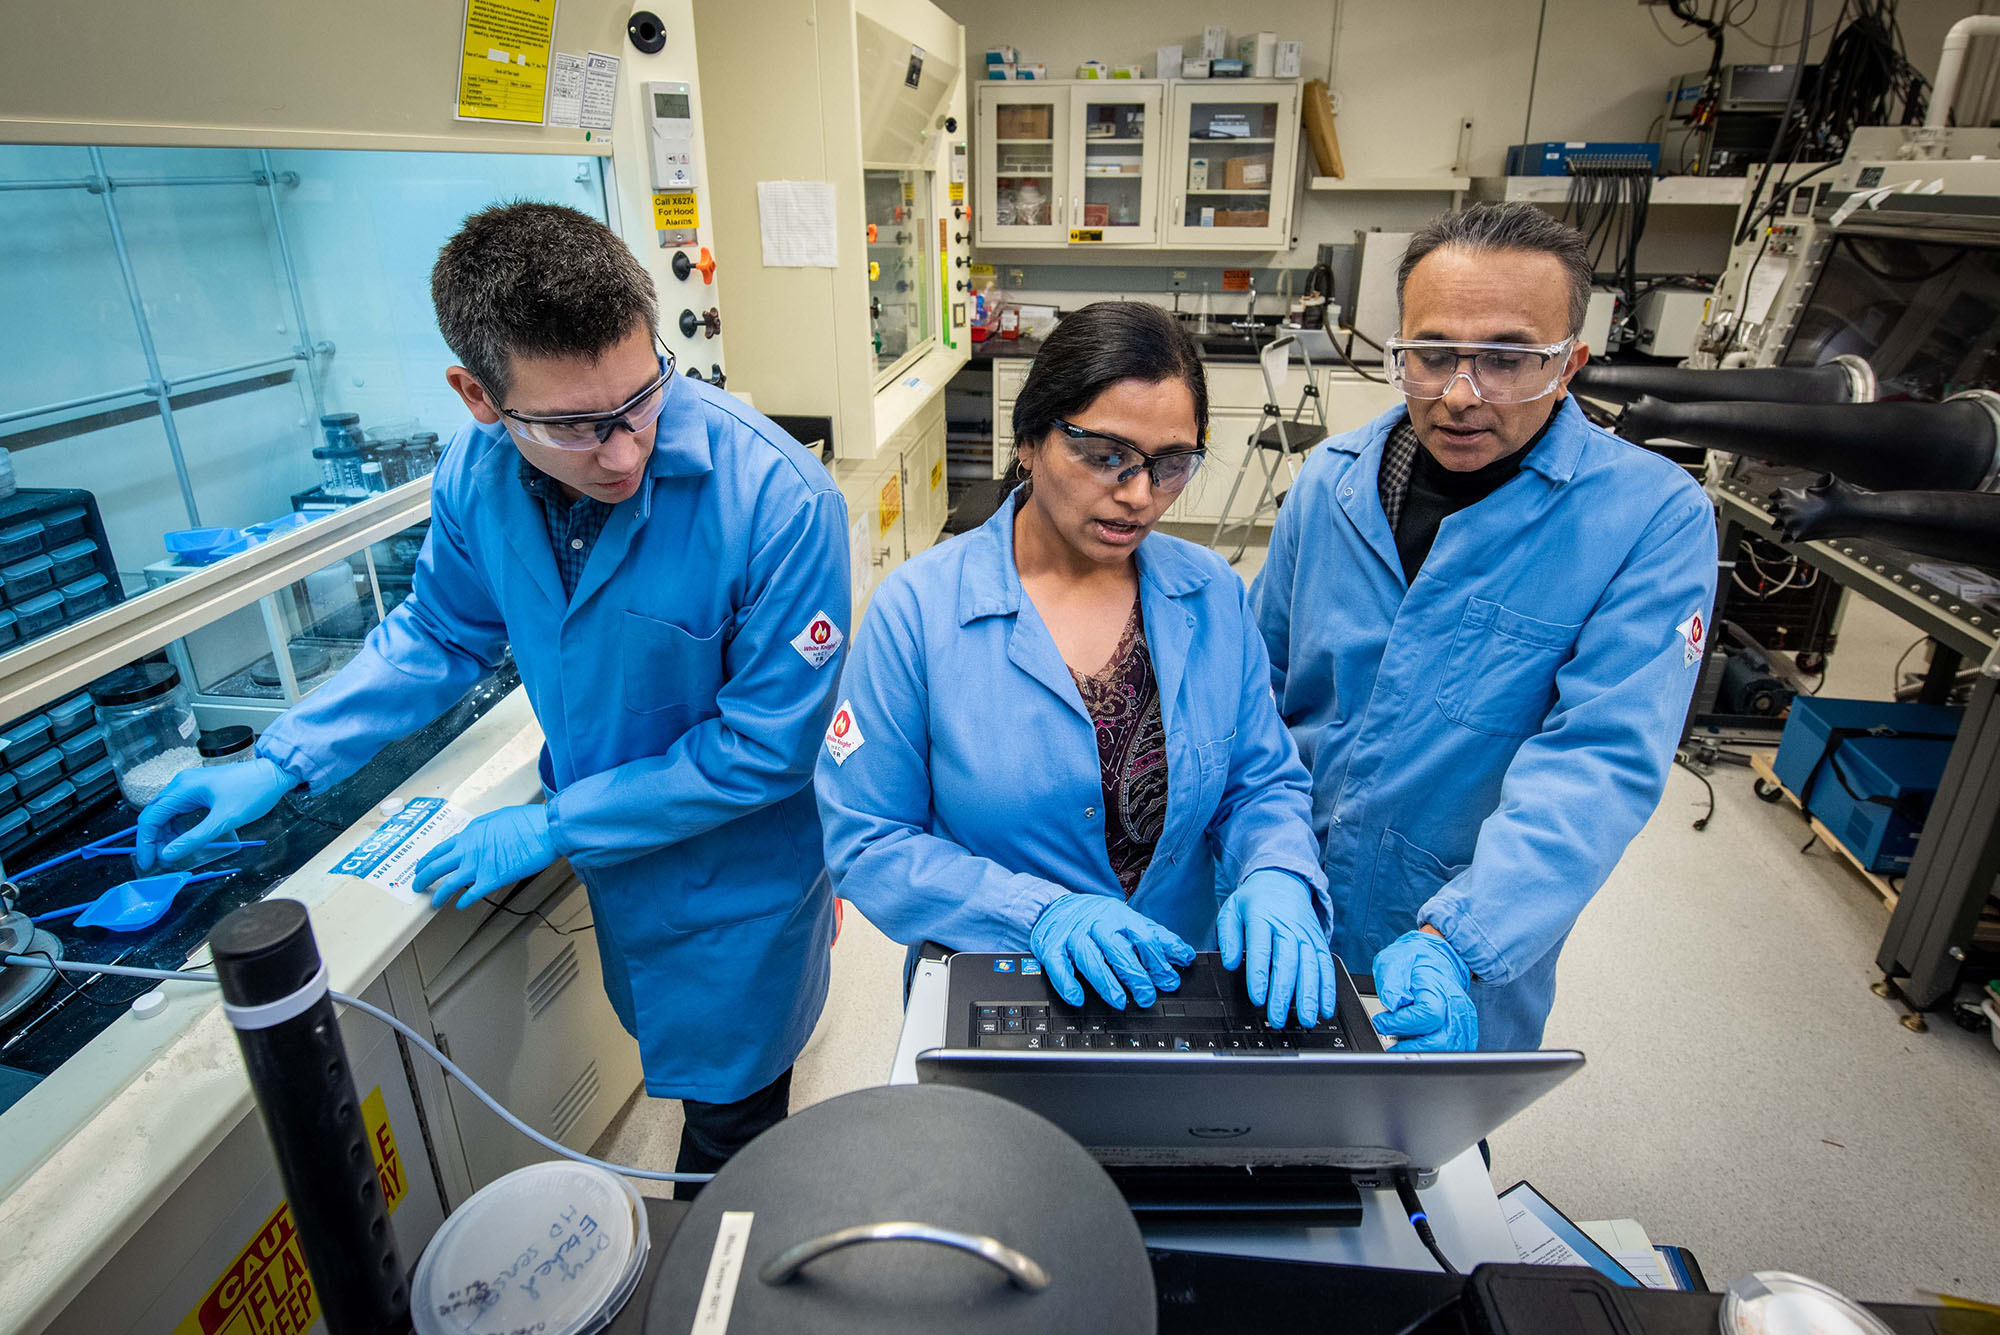 Three scientists working together in a laboratory.